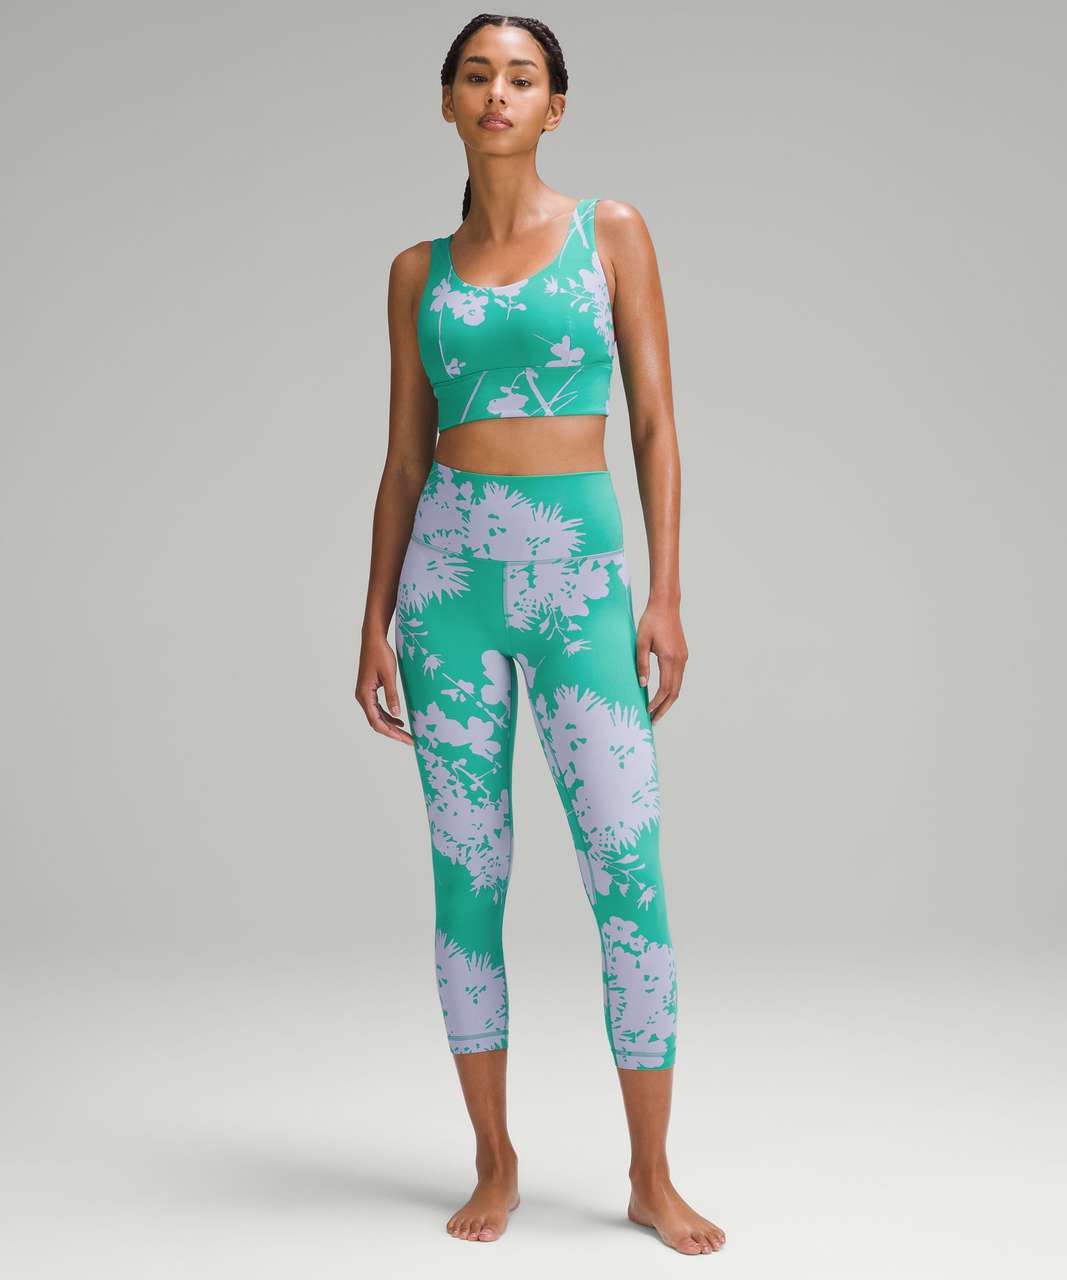 Lululemon Align Bra *Light Support, C/D Cup - BLOSSOM SILHOUETTE MAX Lilac Smoke Kelly Green